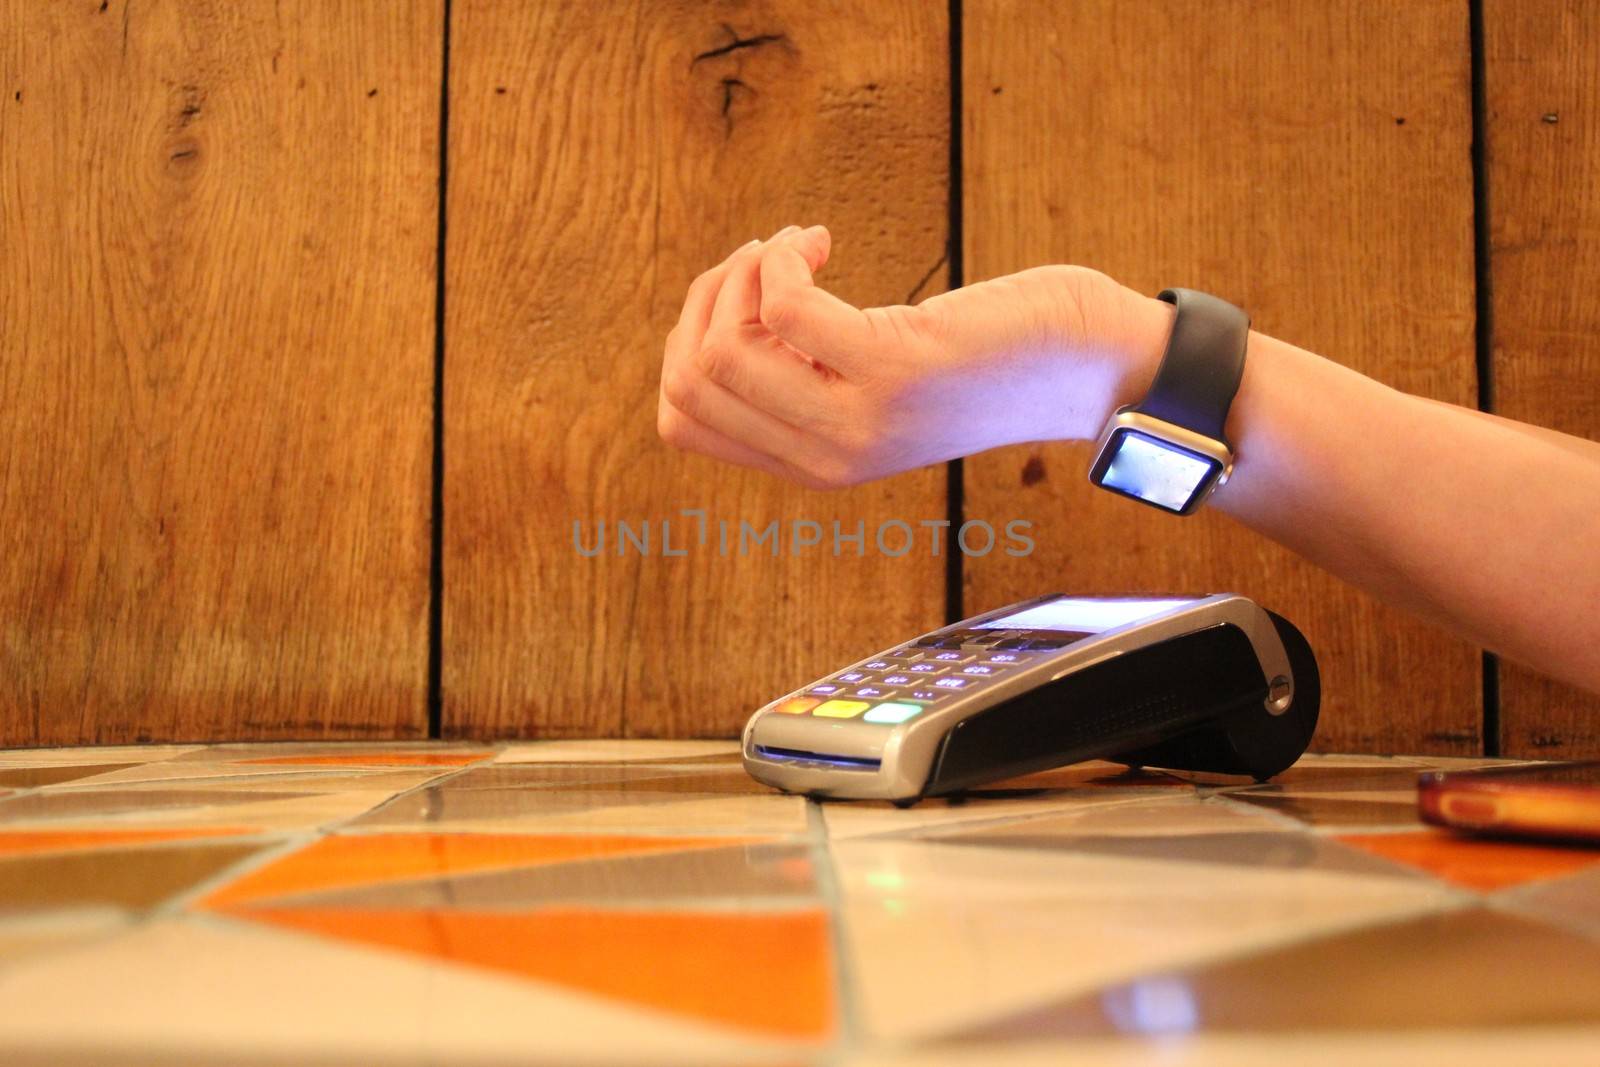 contactless payment smartwatch pdq with hand holding credit card to pay by cheekylorns